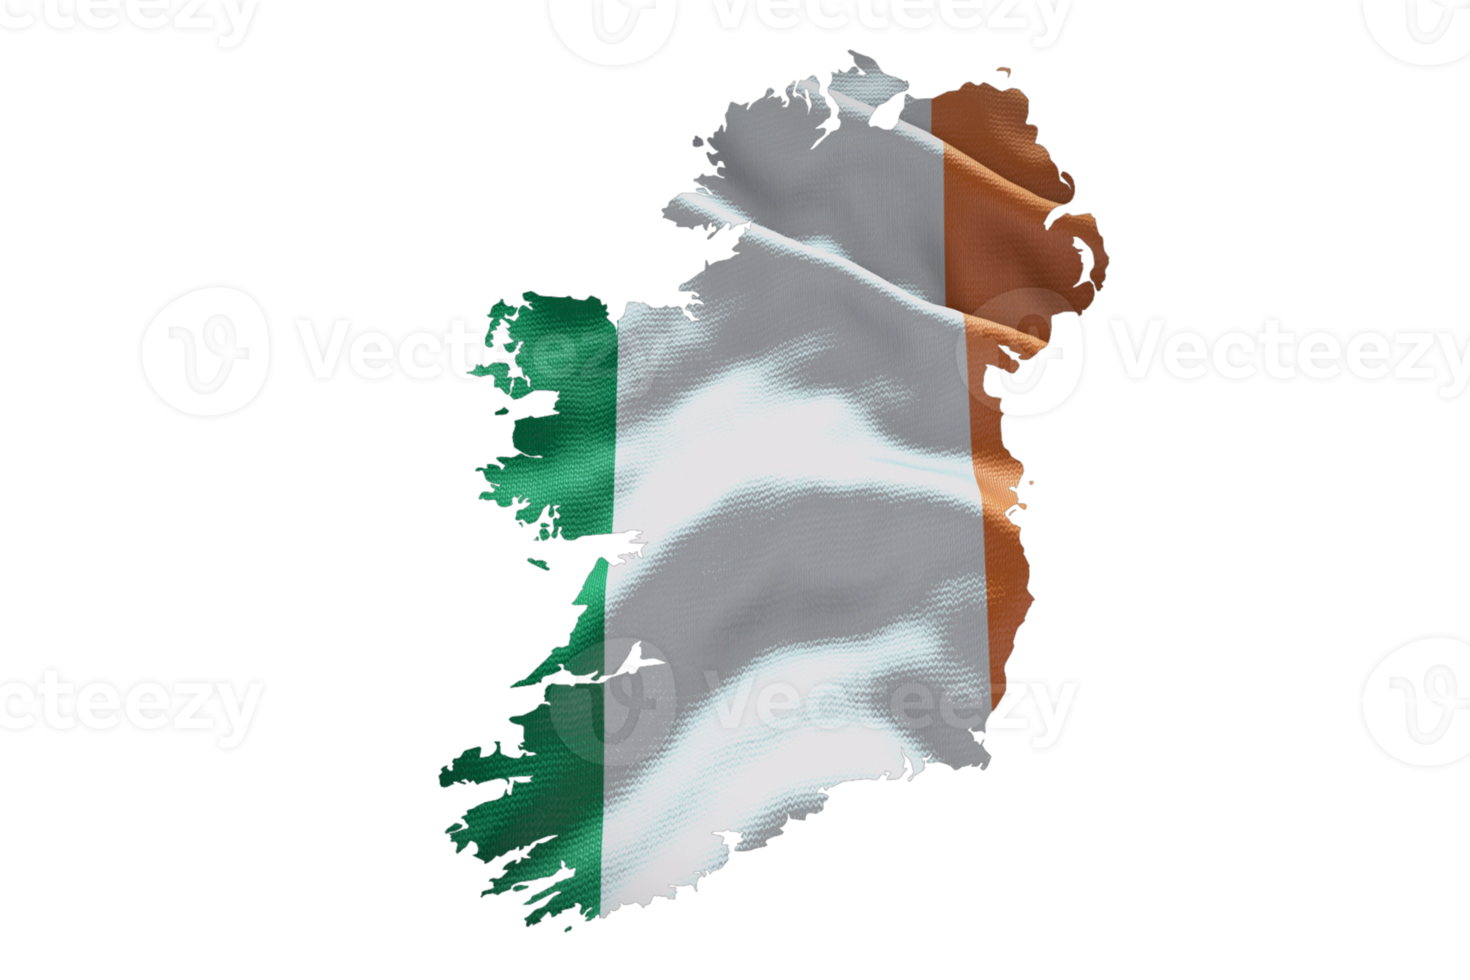 Ireland map outline icon. PNG alpha channel. Country with national flag